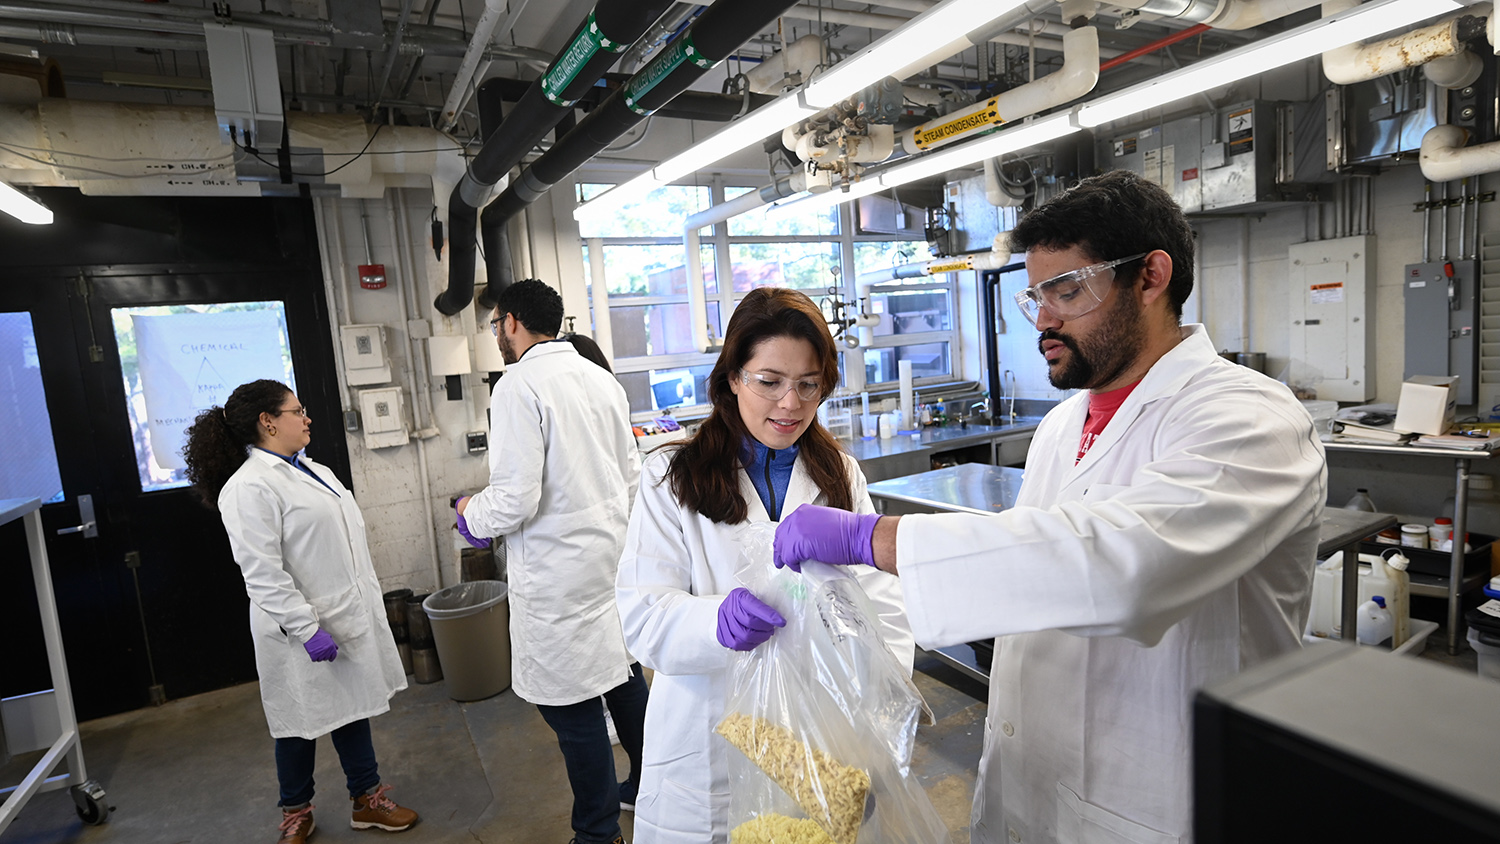 Graduate students work in the Pulp and paper lab